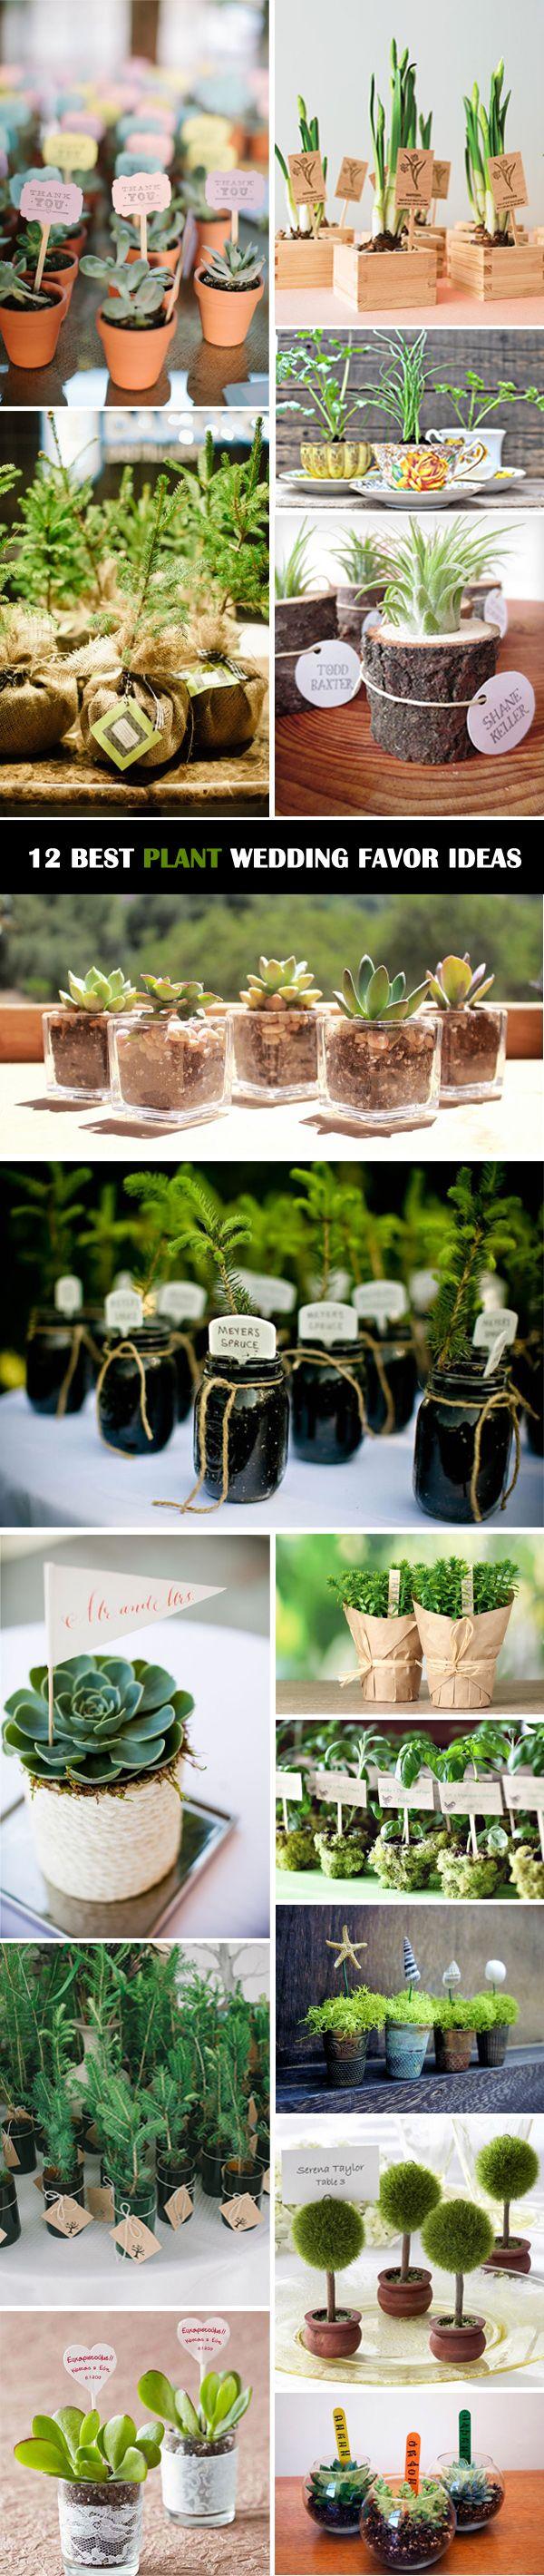 Hochzeit - 12 Ultimate Great Ideas For Lovely Plant Wedding Favors